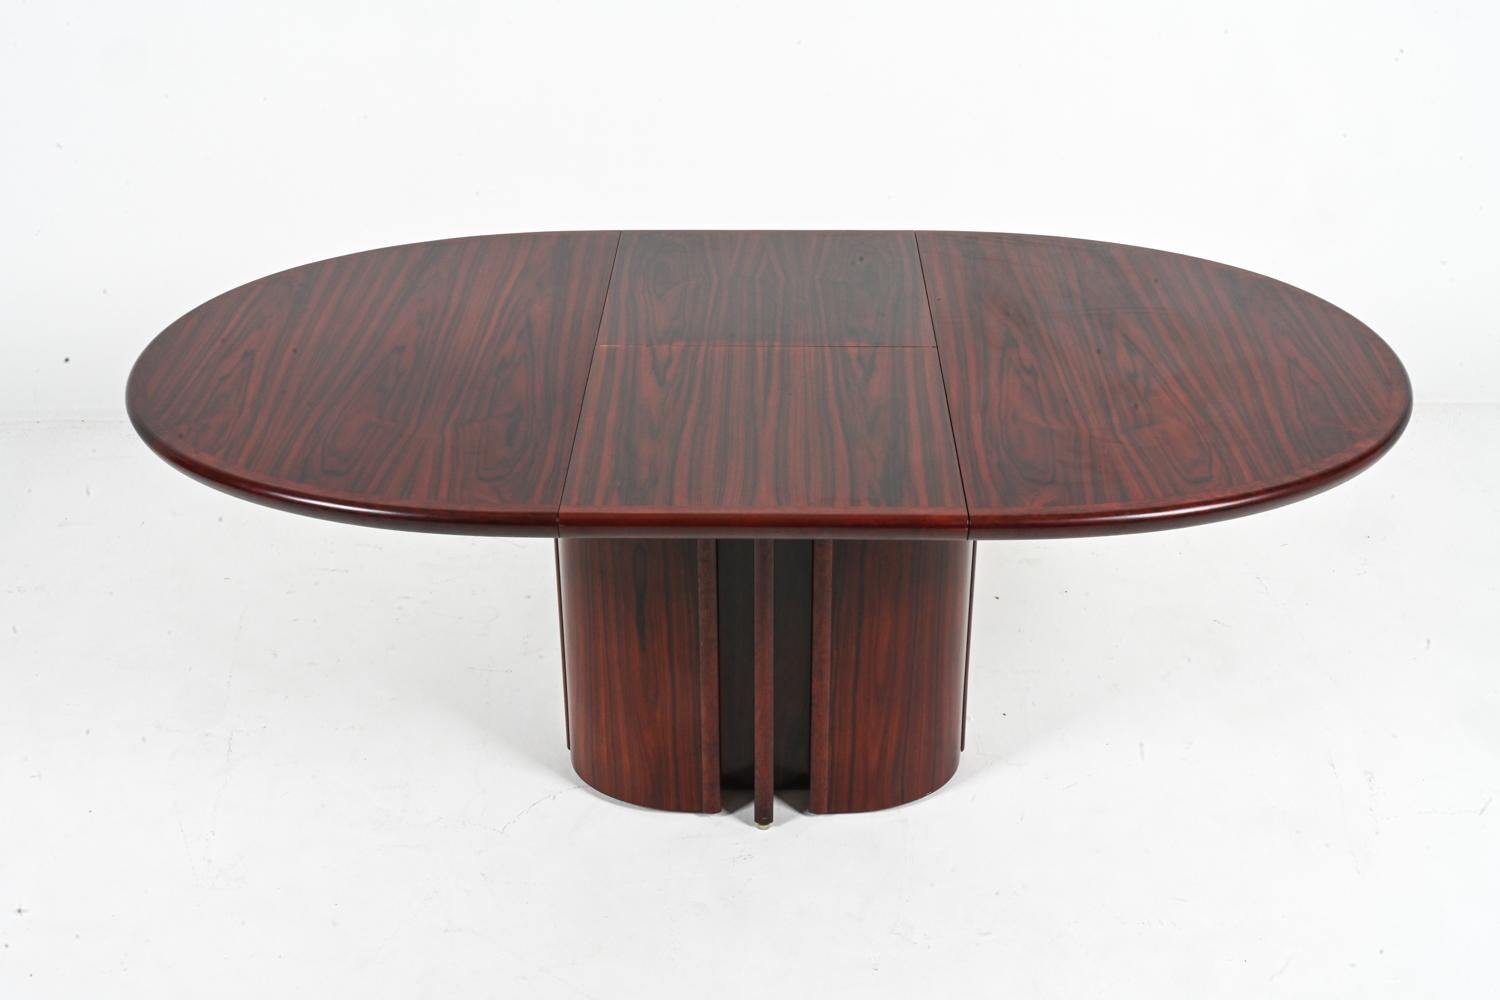 Mid-Century Modern Art Deco-Style Butterfly Leaf Dining Table by Skovby, Denmark 1970's For Sale